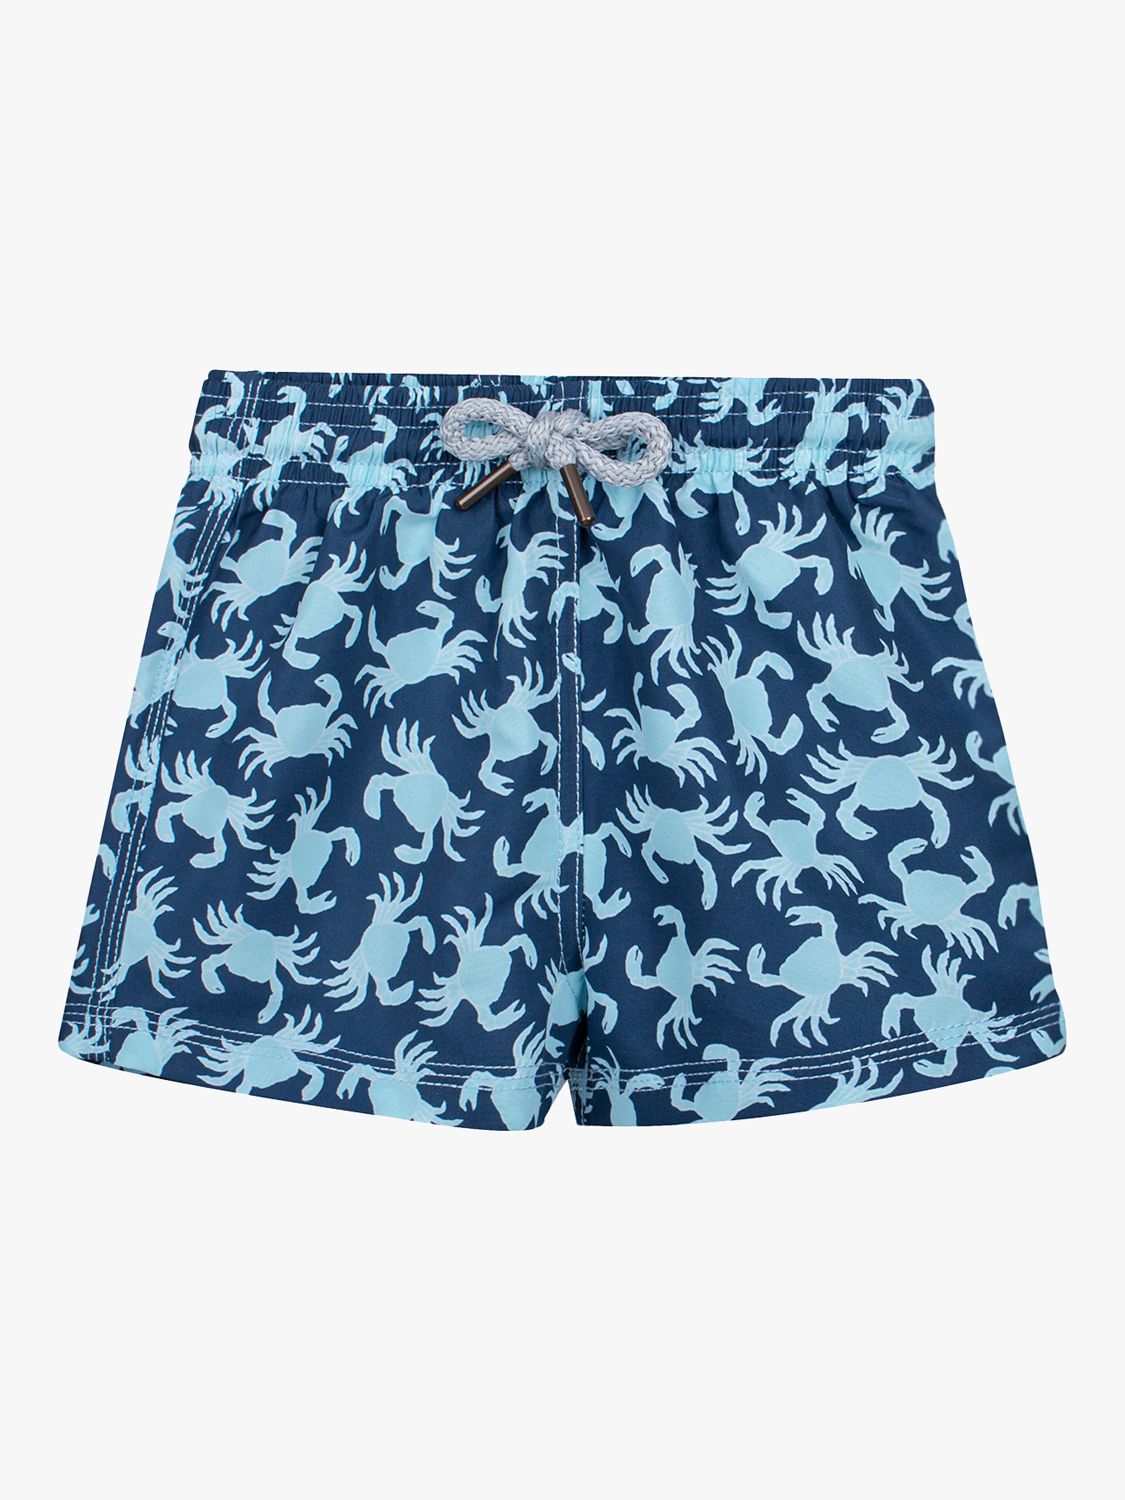 Trotters Baby Crab Print Swim Shorts, Navy, 3-6 months